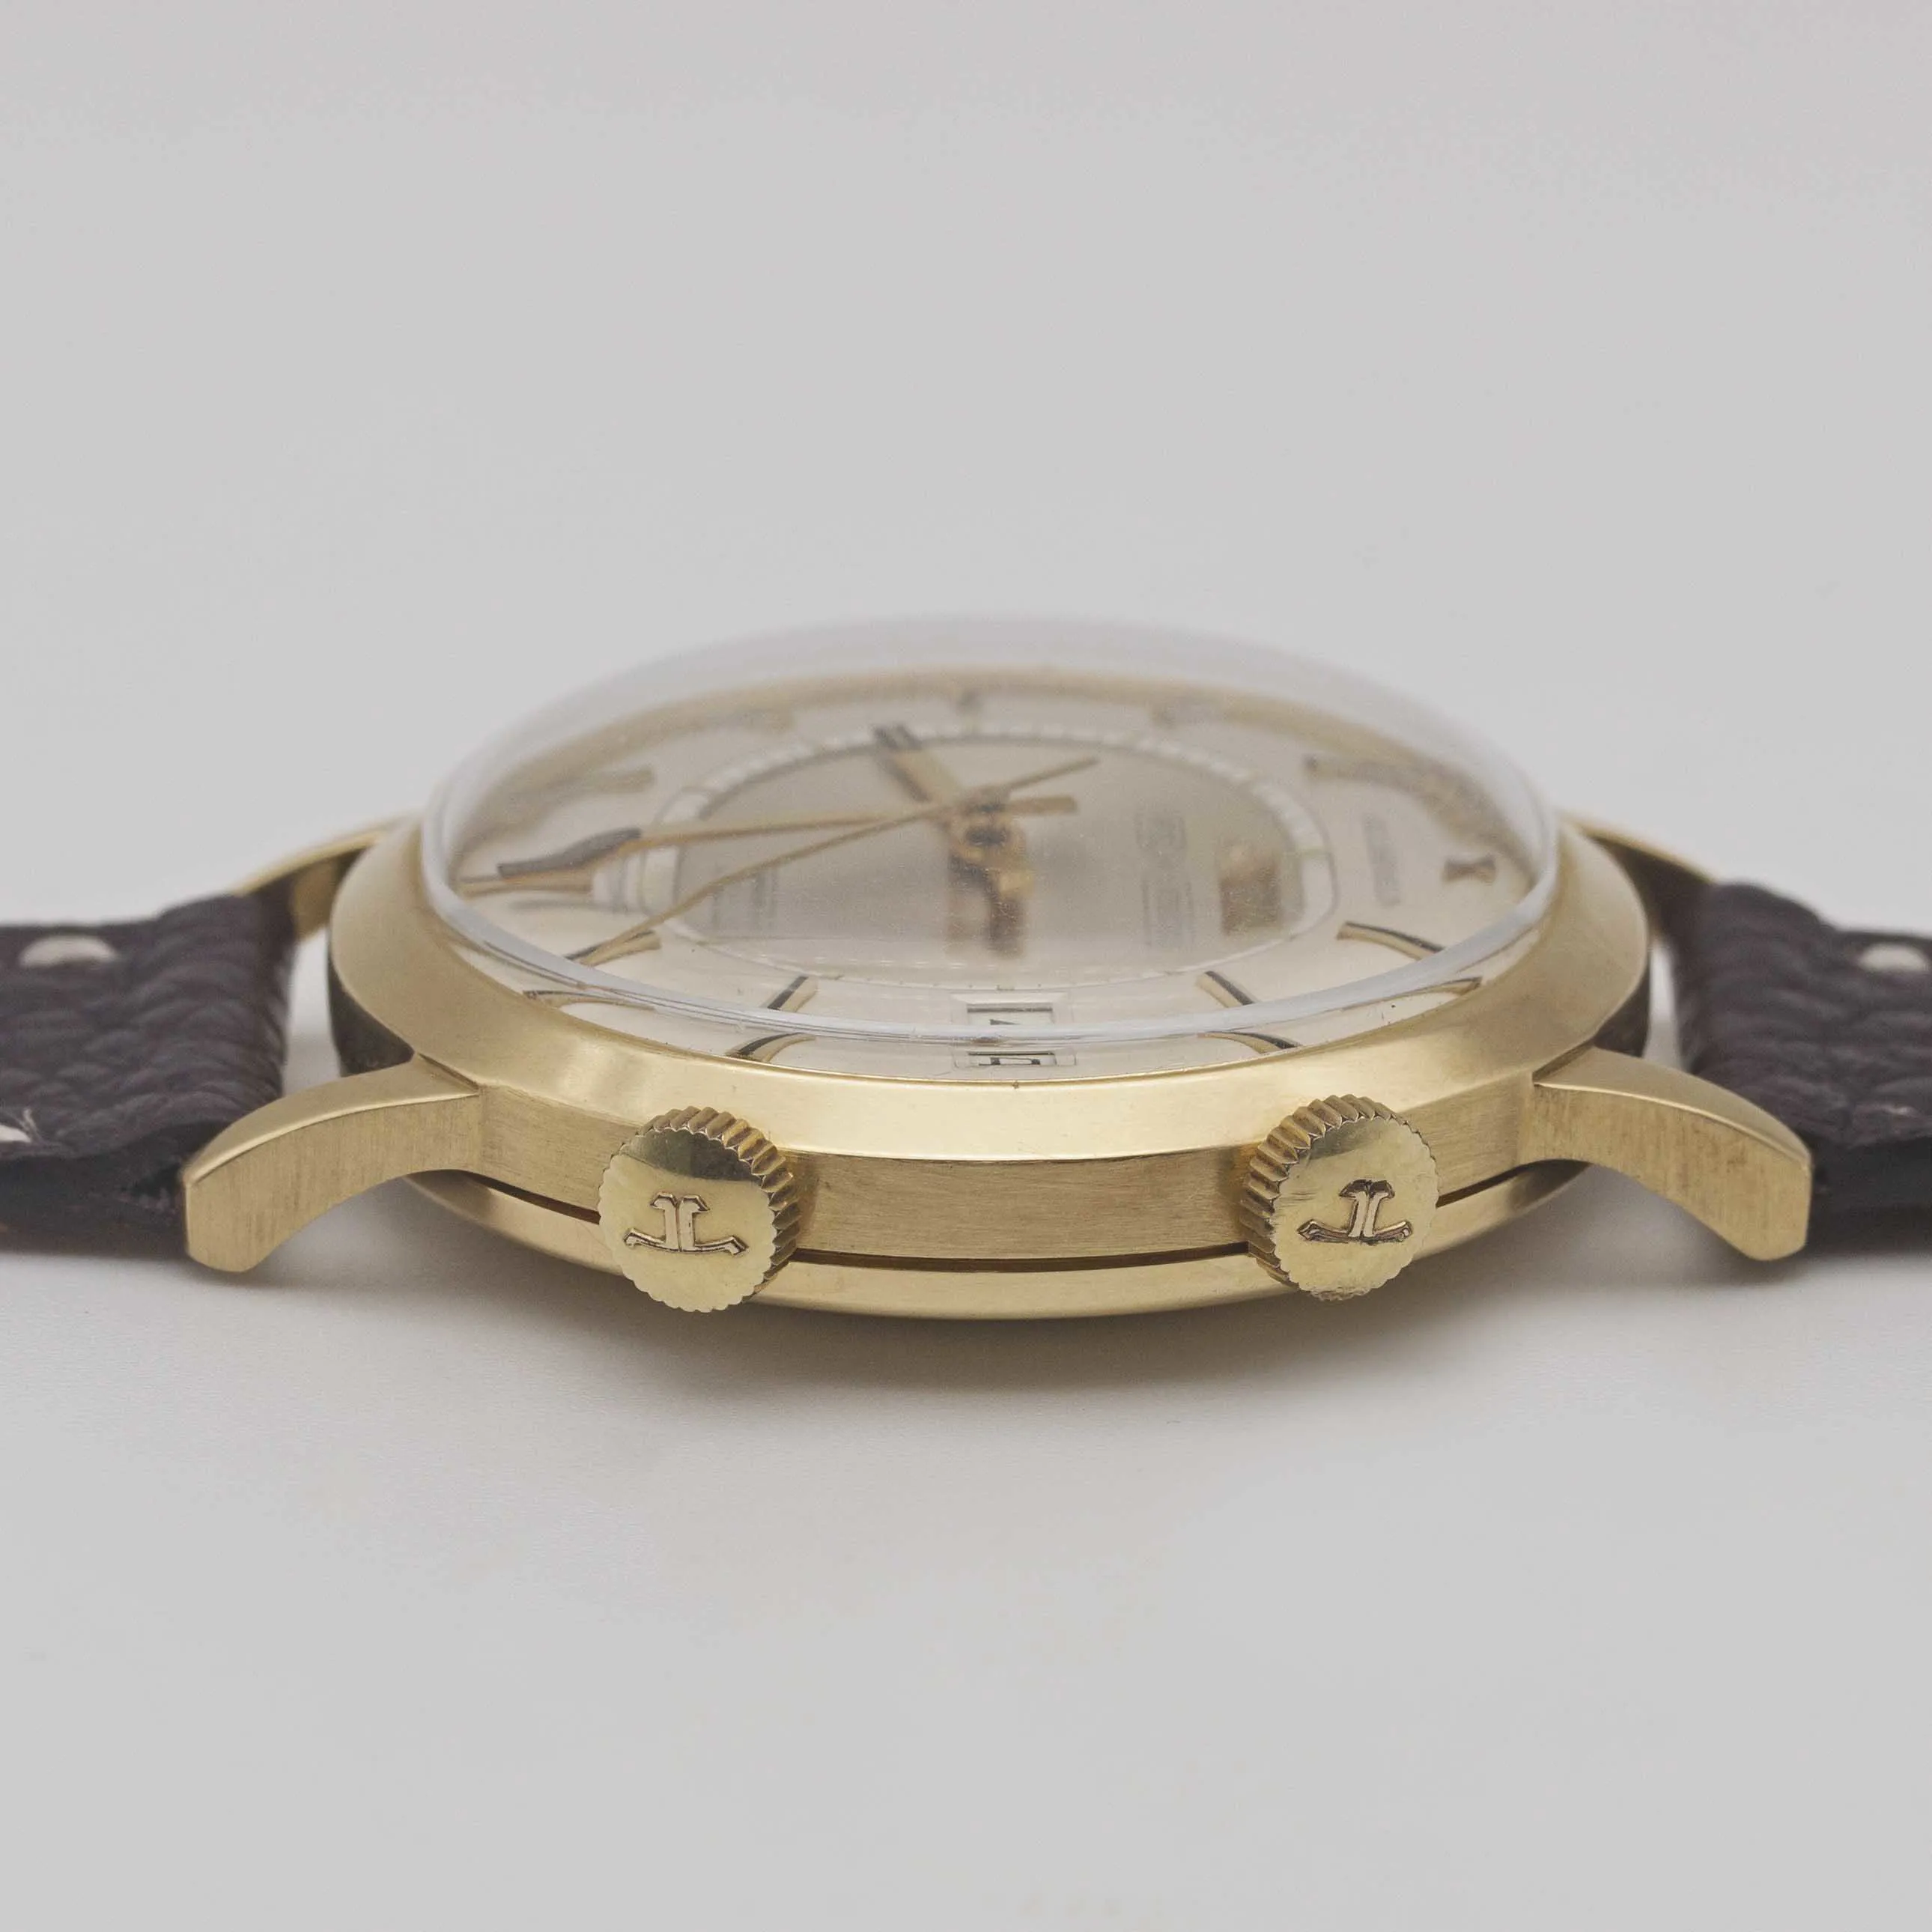 Jaeger-LeCoultre Memovox 855 37mm Yellow gold Champagne 8